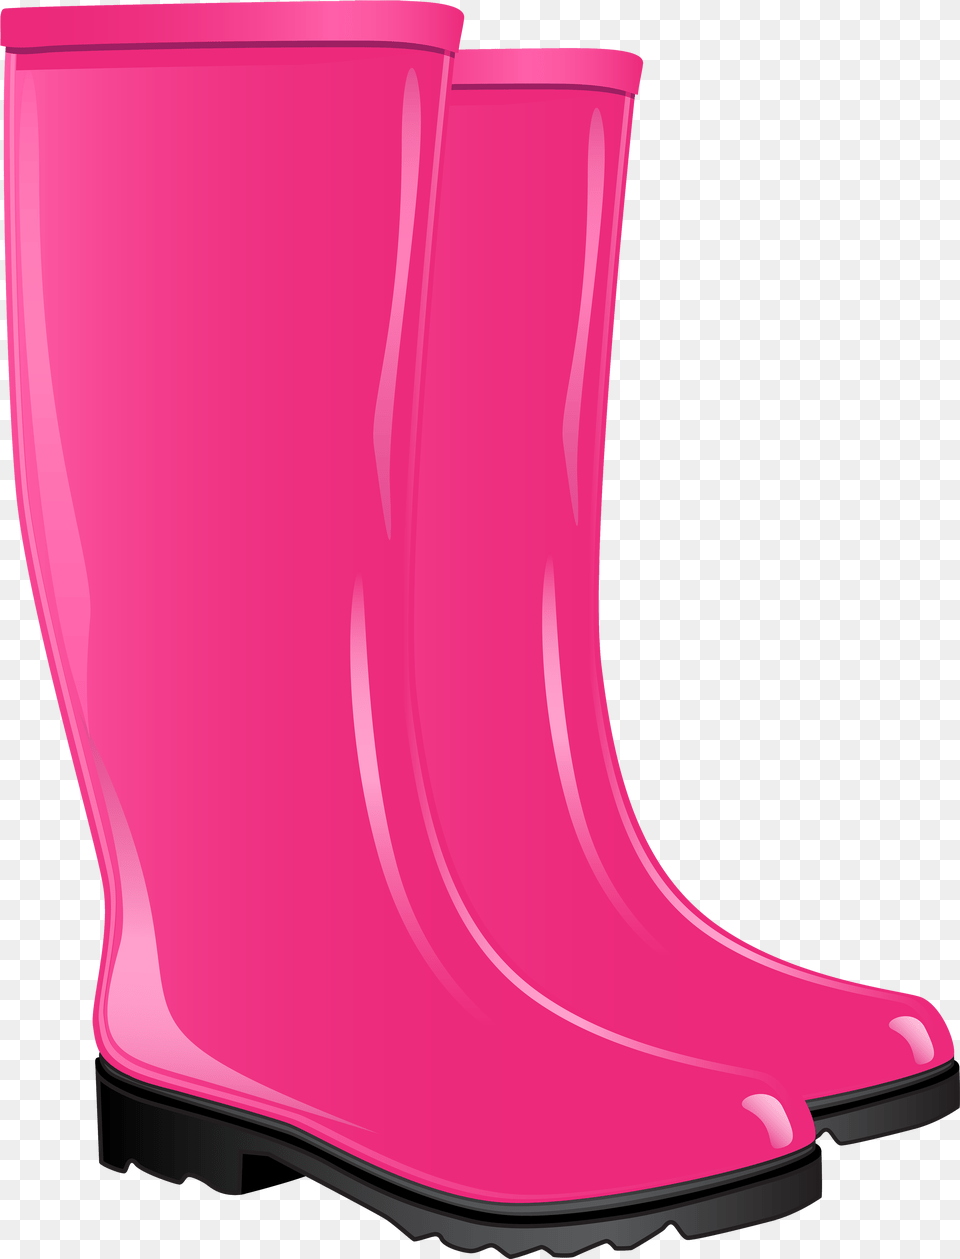 Freeuse Stock Boot Clipart Boot Timberland Wellington Boots Clip Art, Clothing, Footwear, Appliance, Blow Dryer Png Image